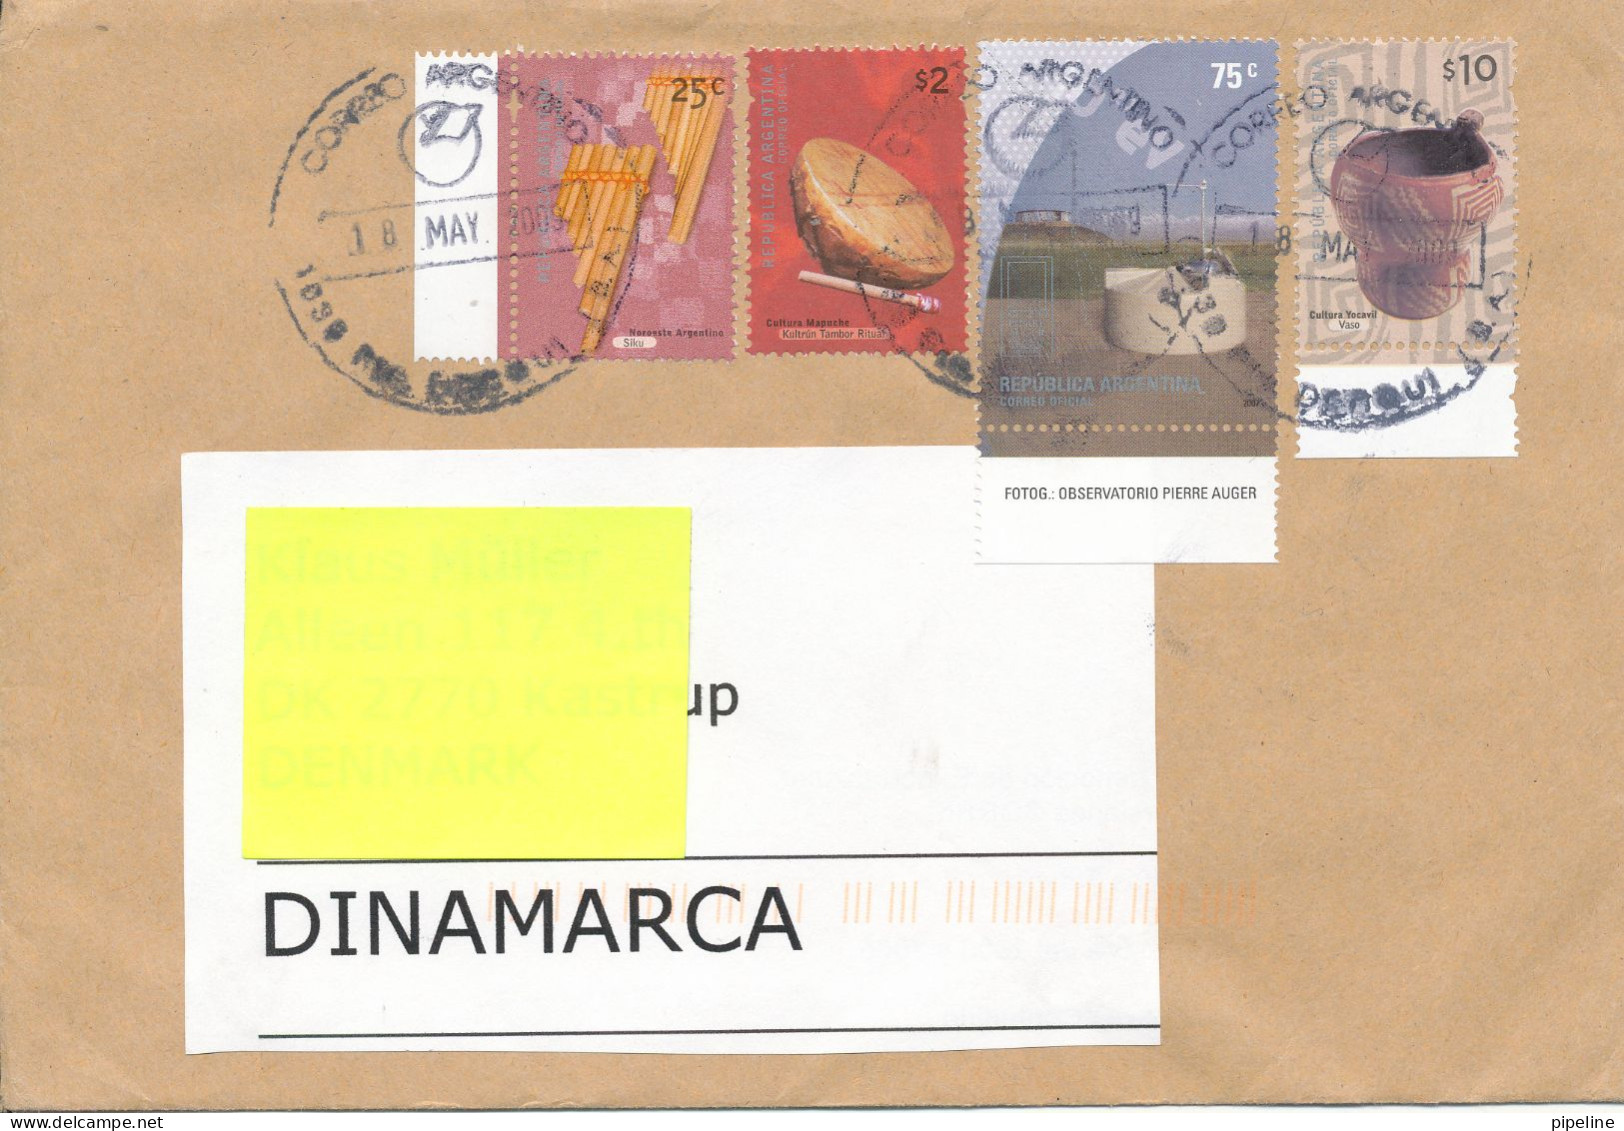 Argentina Cover Sent To Denmark 18-5-2009 Topic Stamps - Covers & Documents